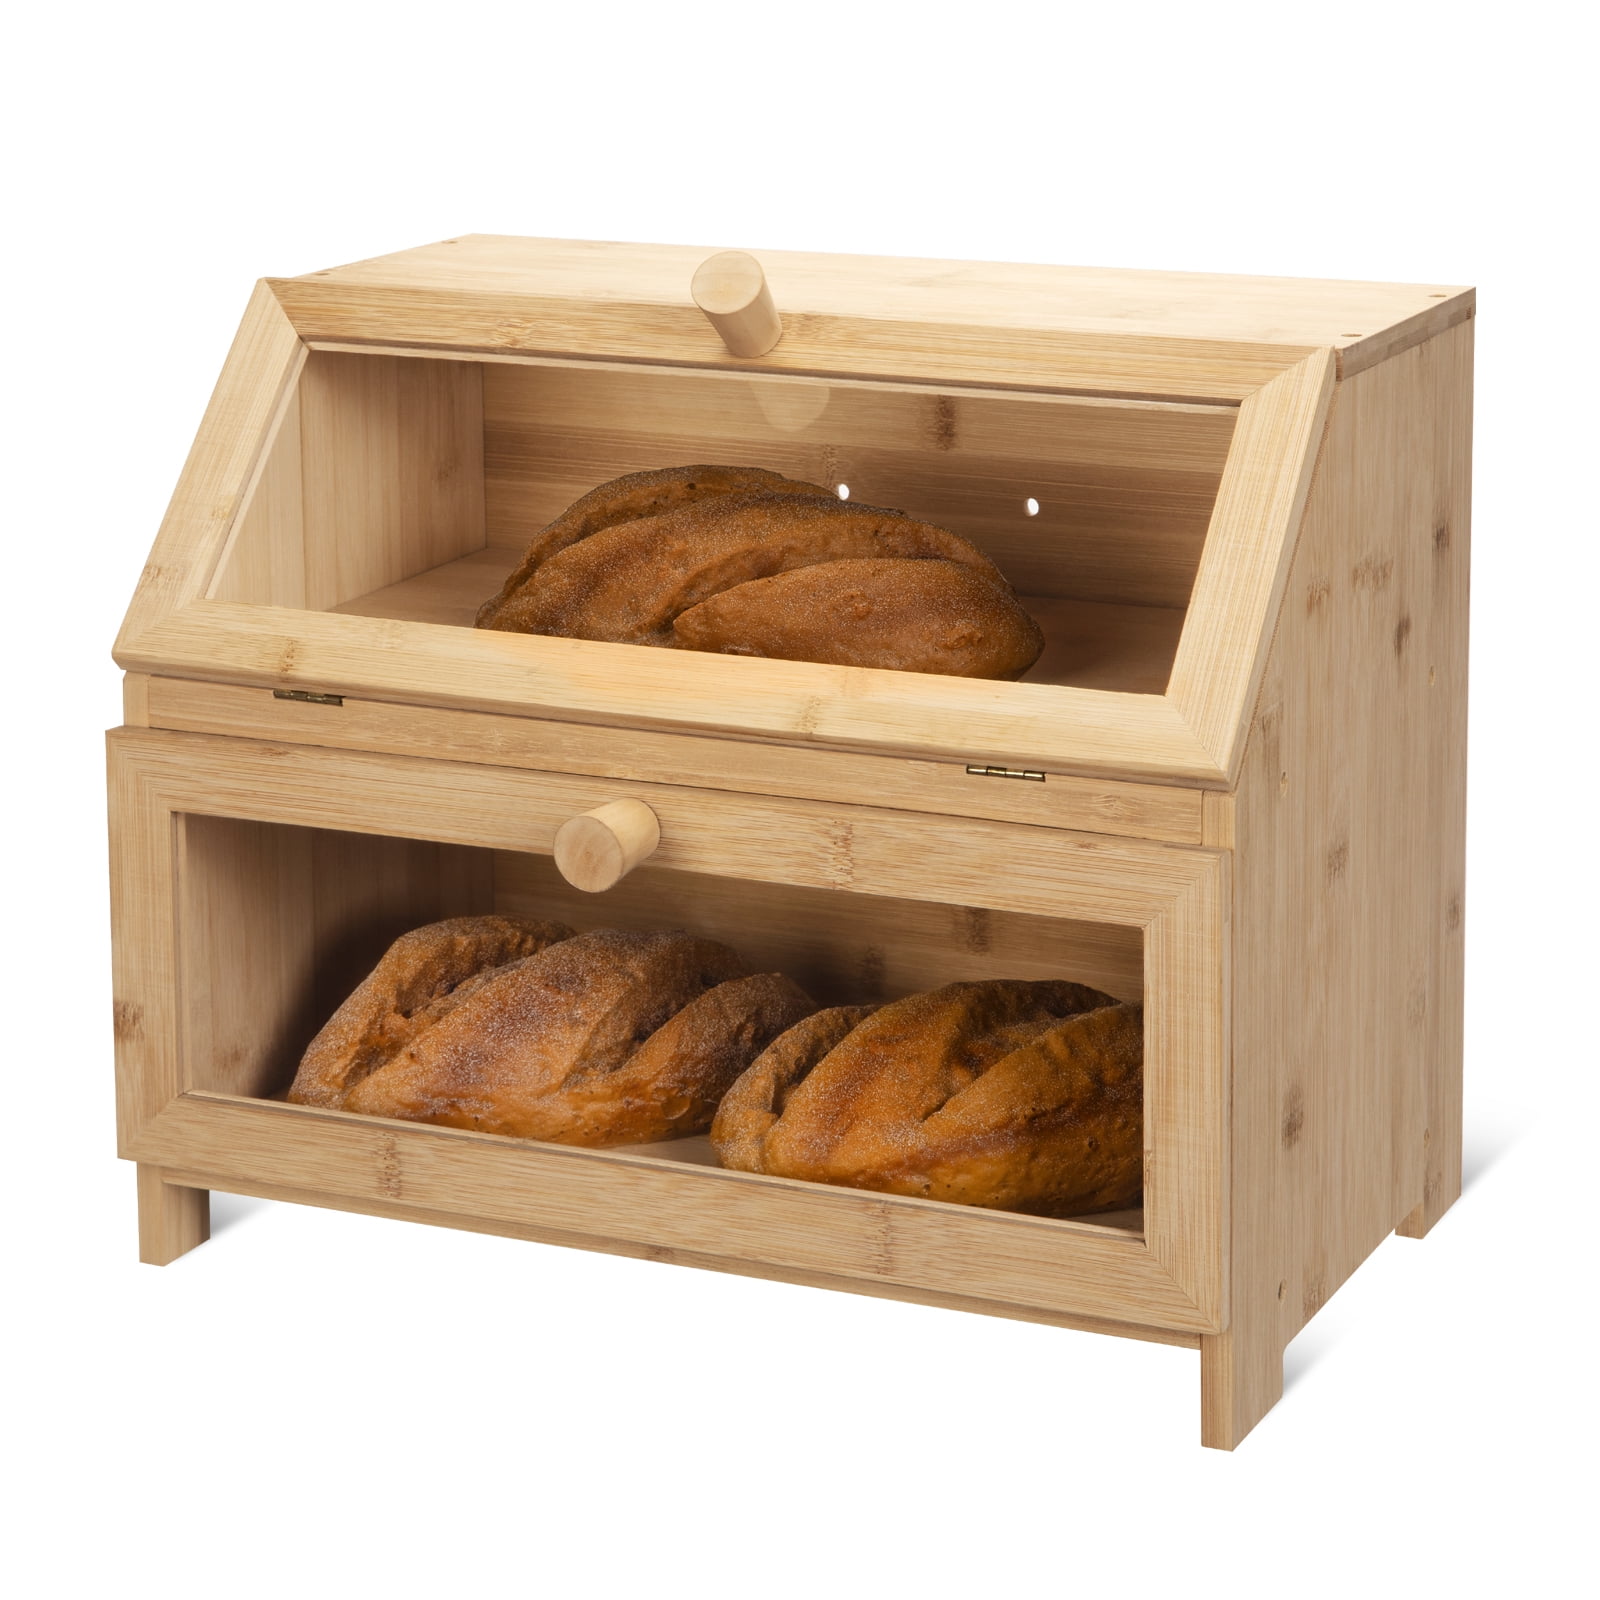 LuvURkitchen Large Bread Box for Kitchen countertop, Cutting Board, and  Stainless Steel Bread Knife. Fully Adjustable shelf; bread storage  container